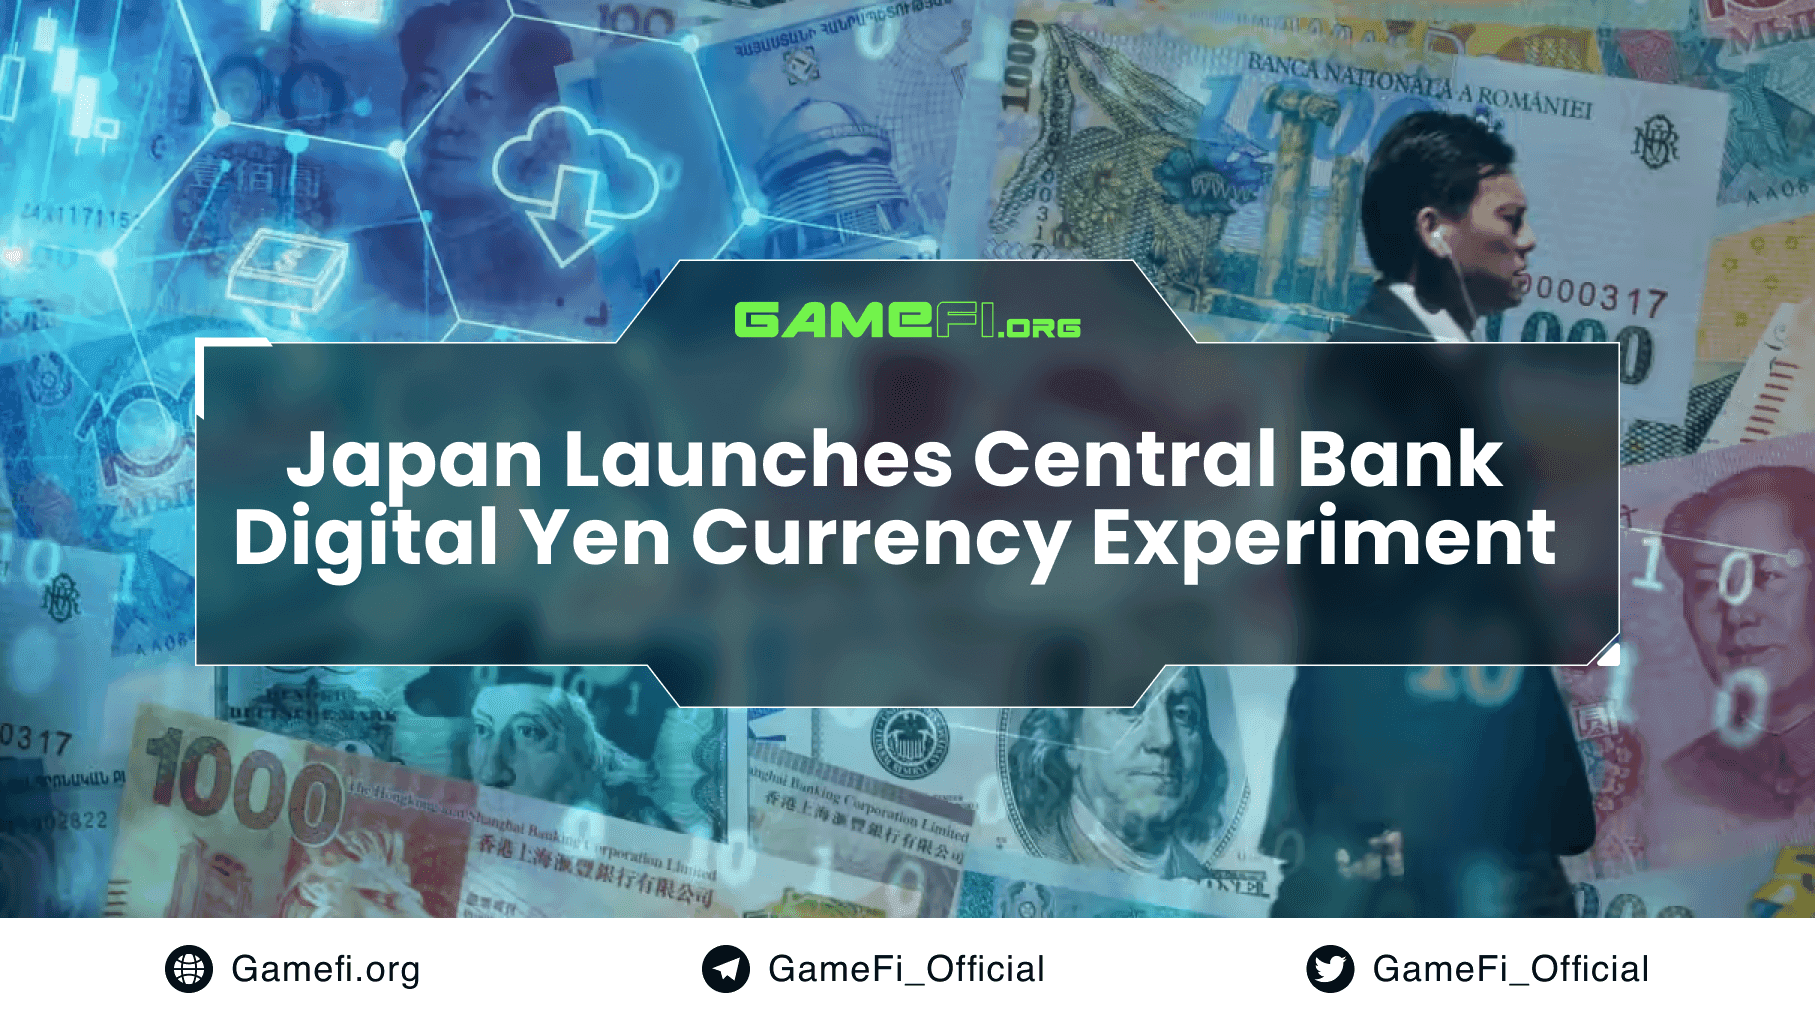 Japan Launches Central Bank Digital Yen Currency Experiment